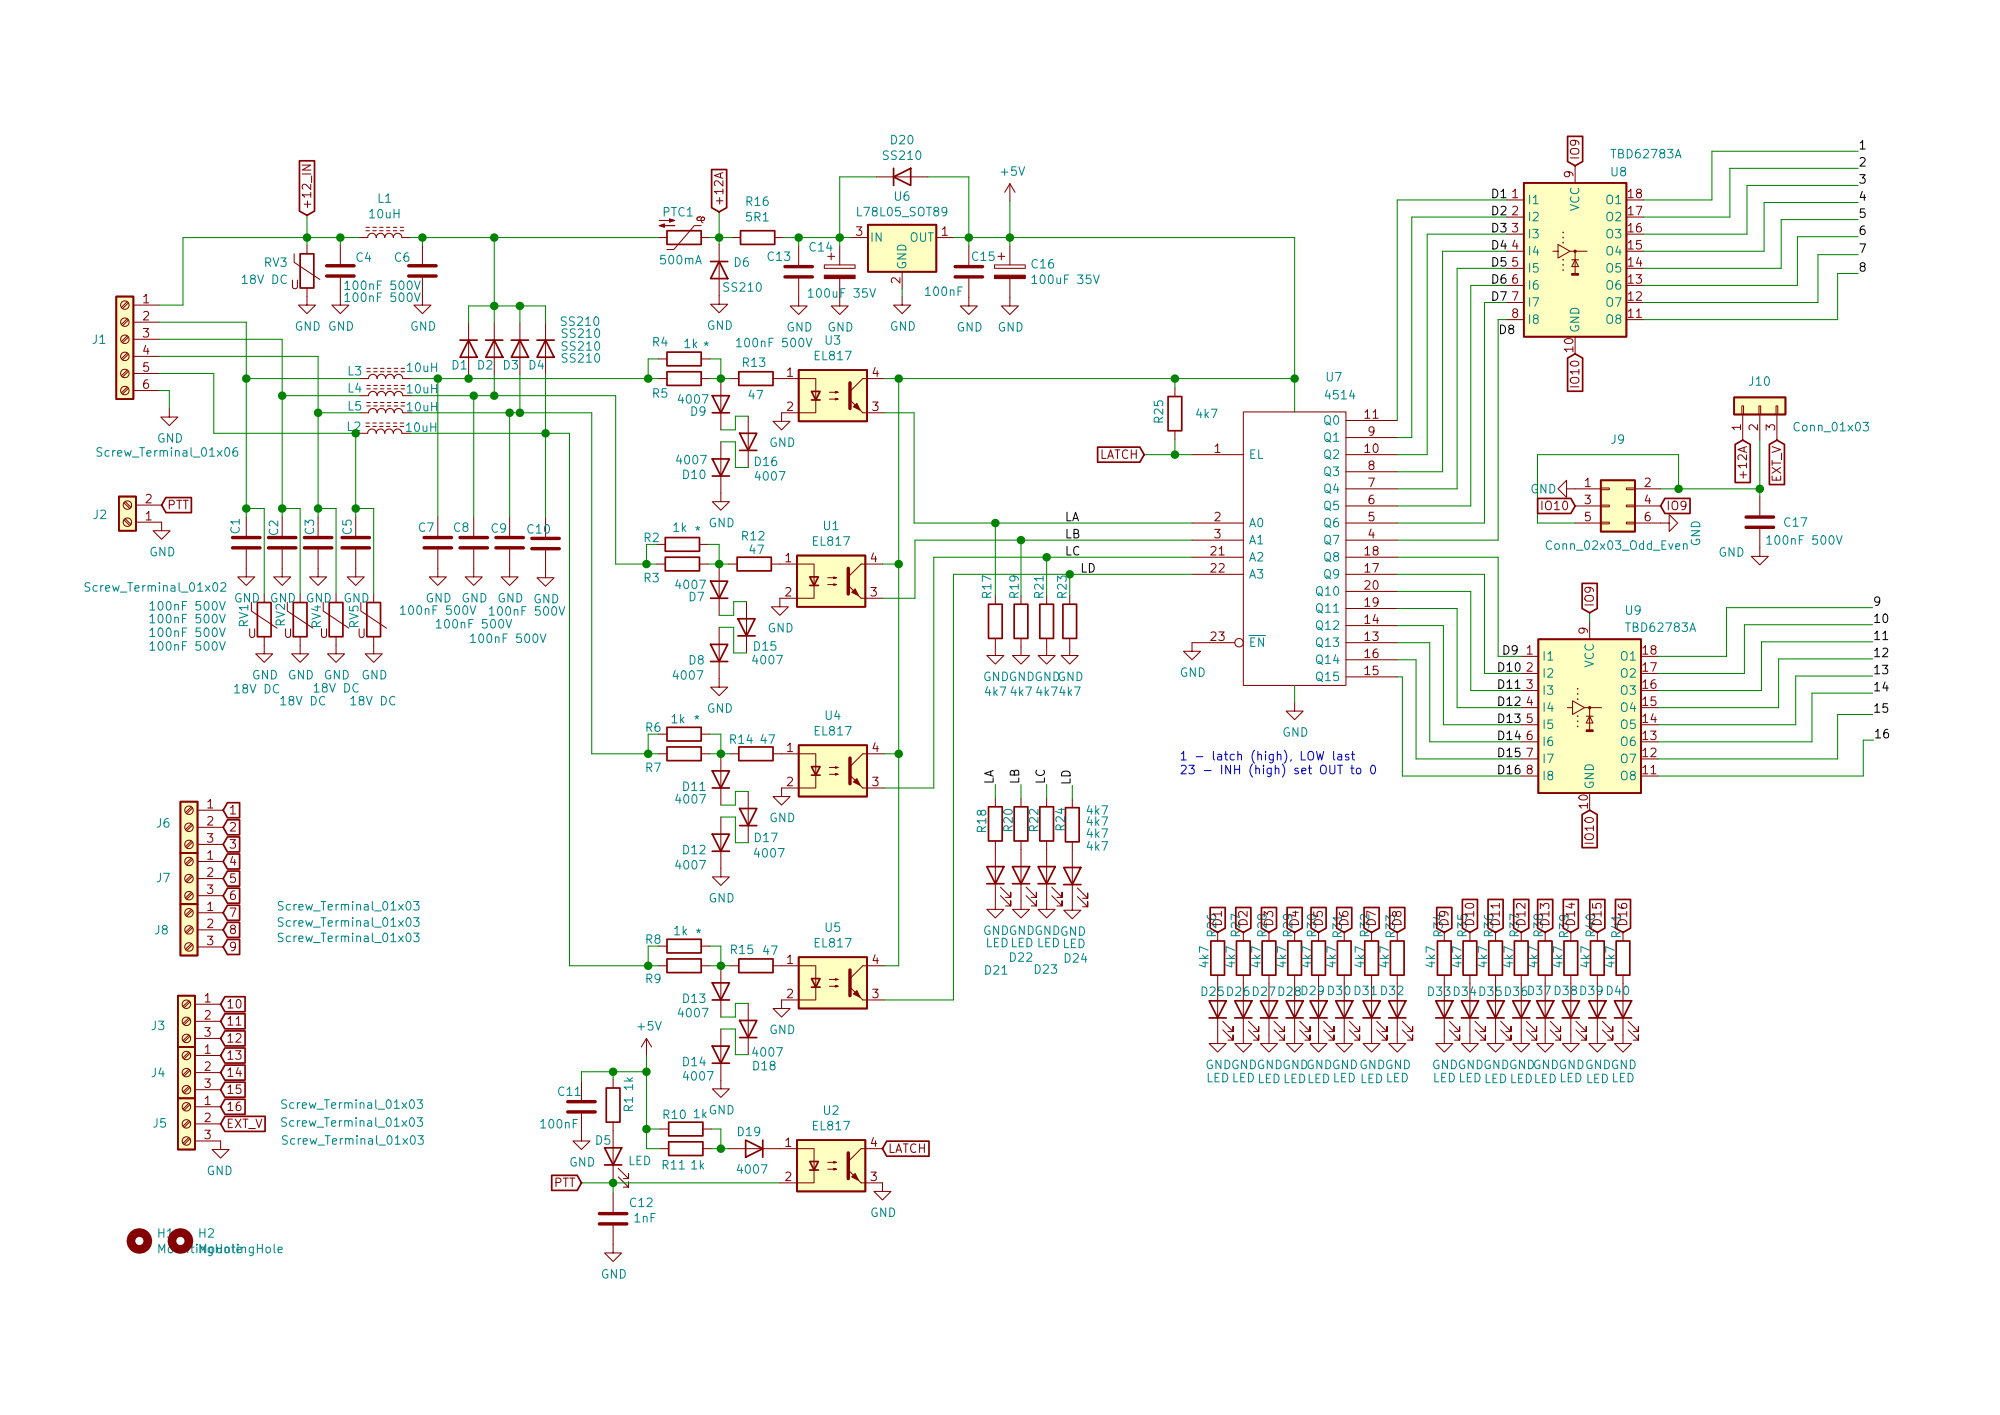 BCD to 16 version converter schematic by qro.cz hamparts.shop